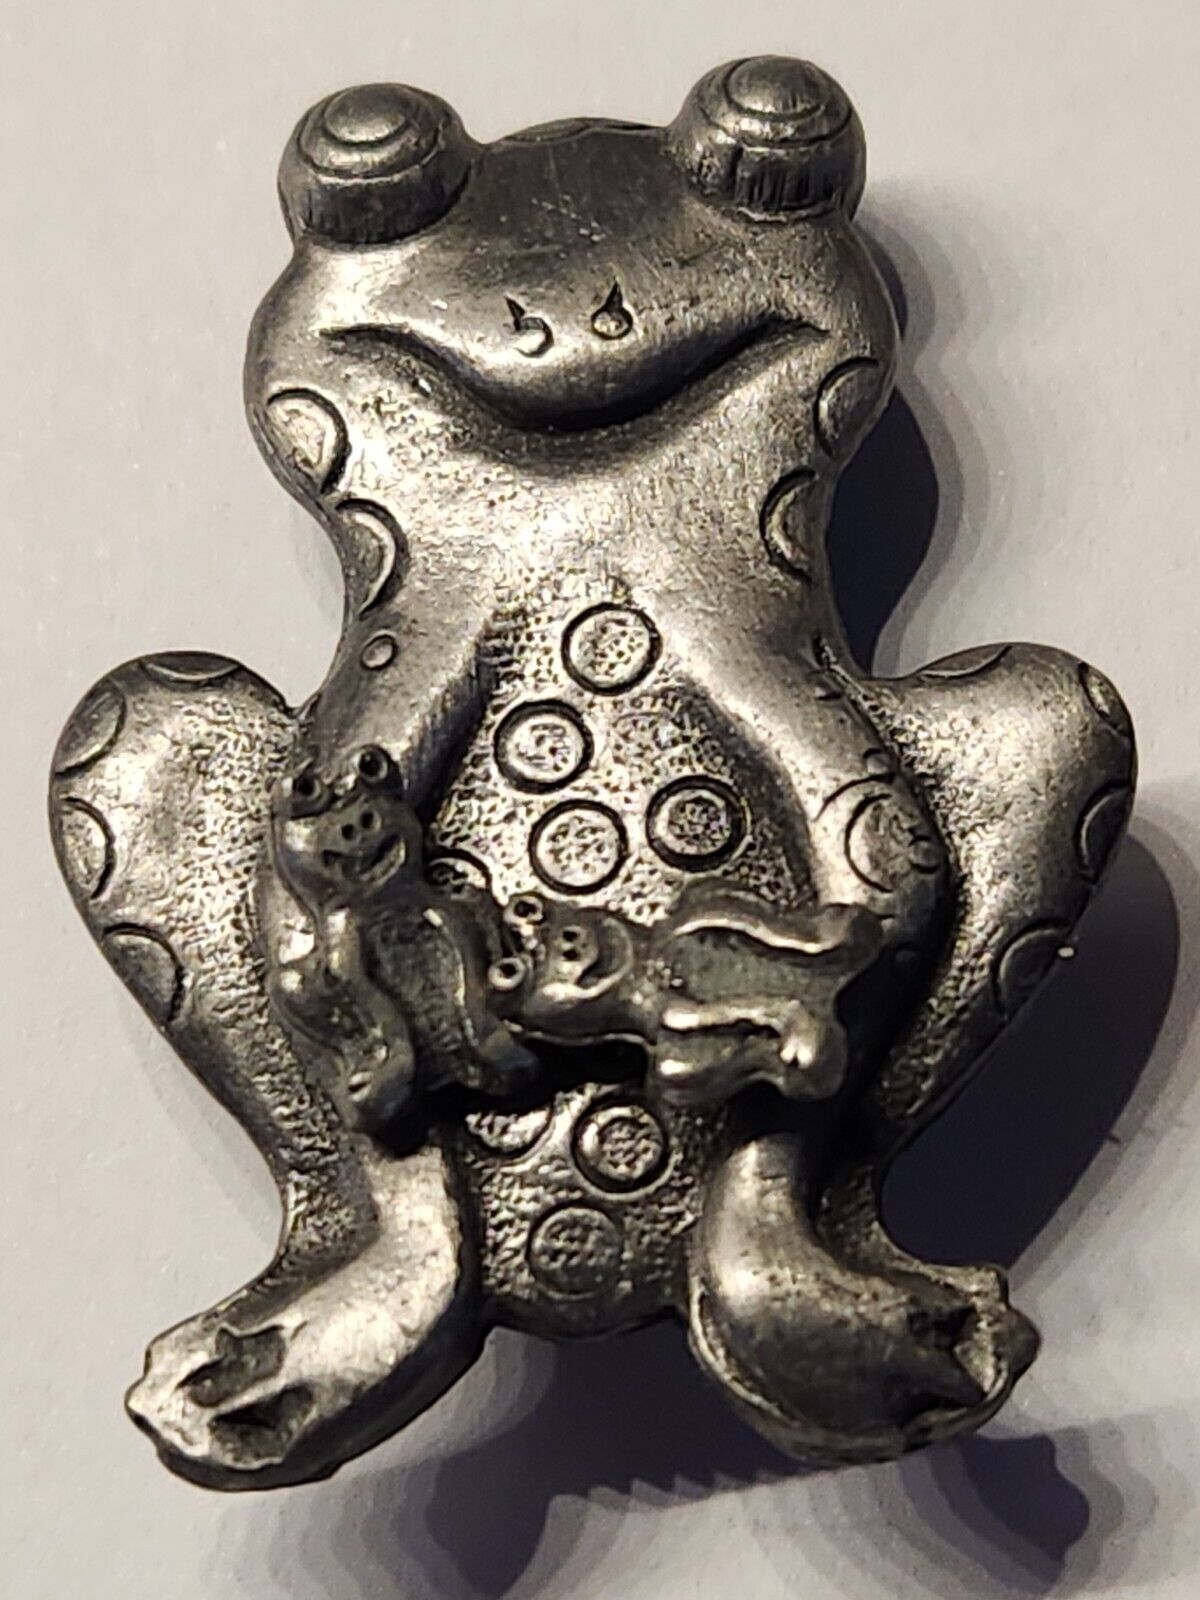 TORINO Vintage Pewter Frog Trinket Box, Earrings, and Necklace Set